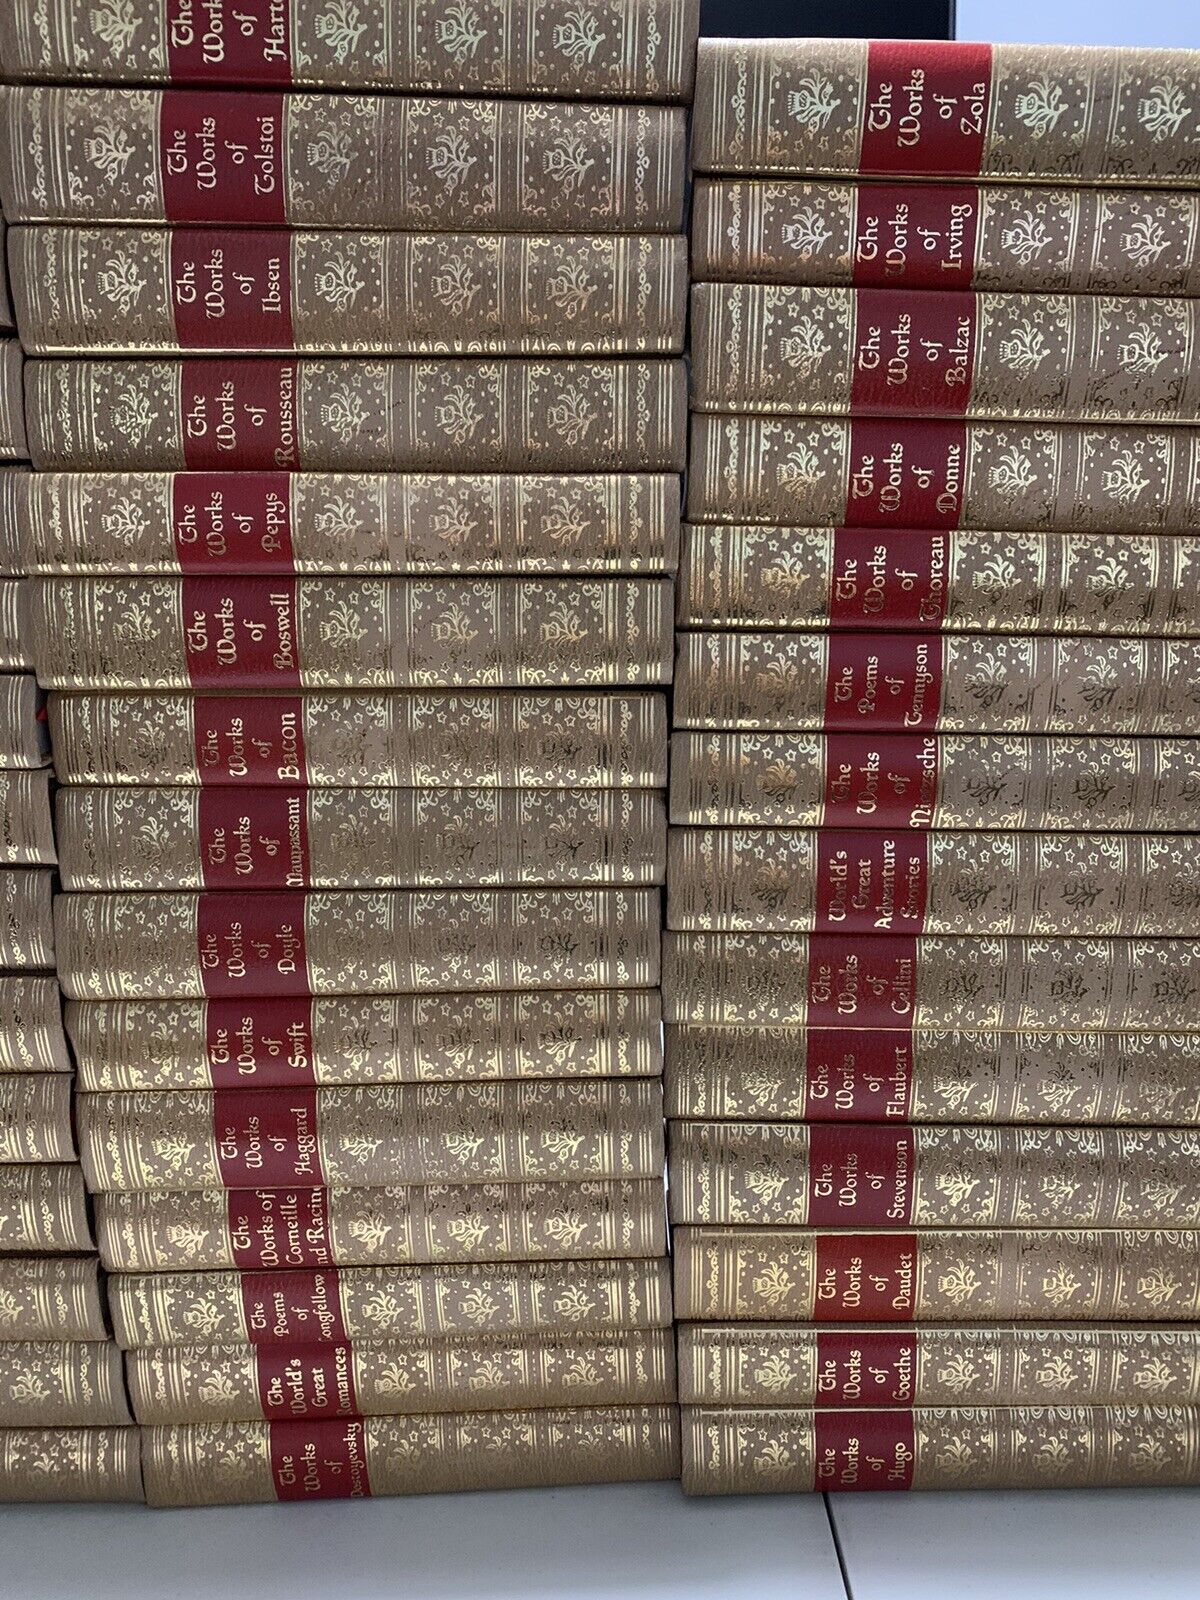 🔥 Vntg The Works Of collection By Walter J black club collection 44 Books RARE